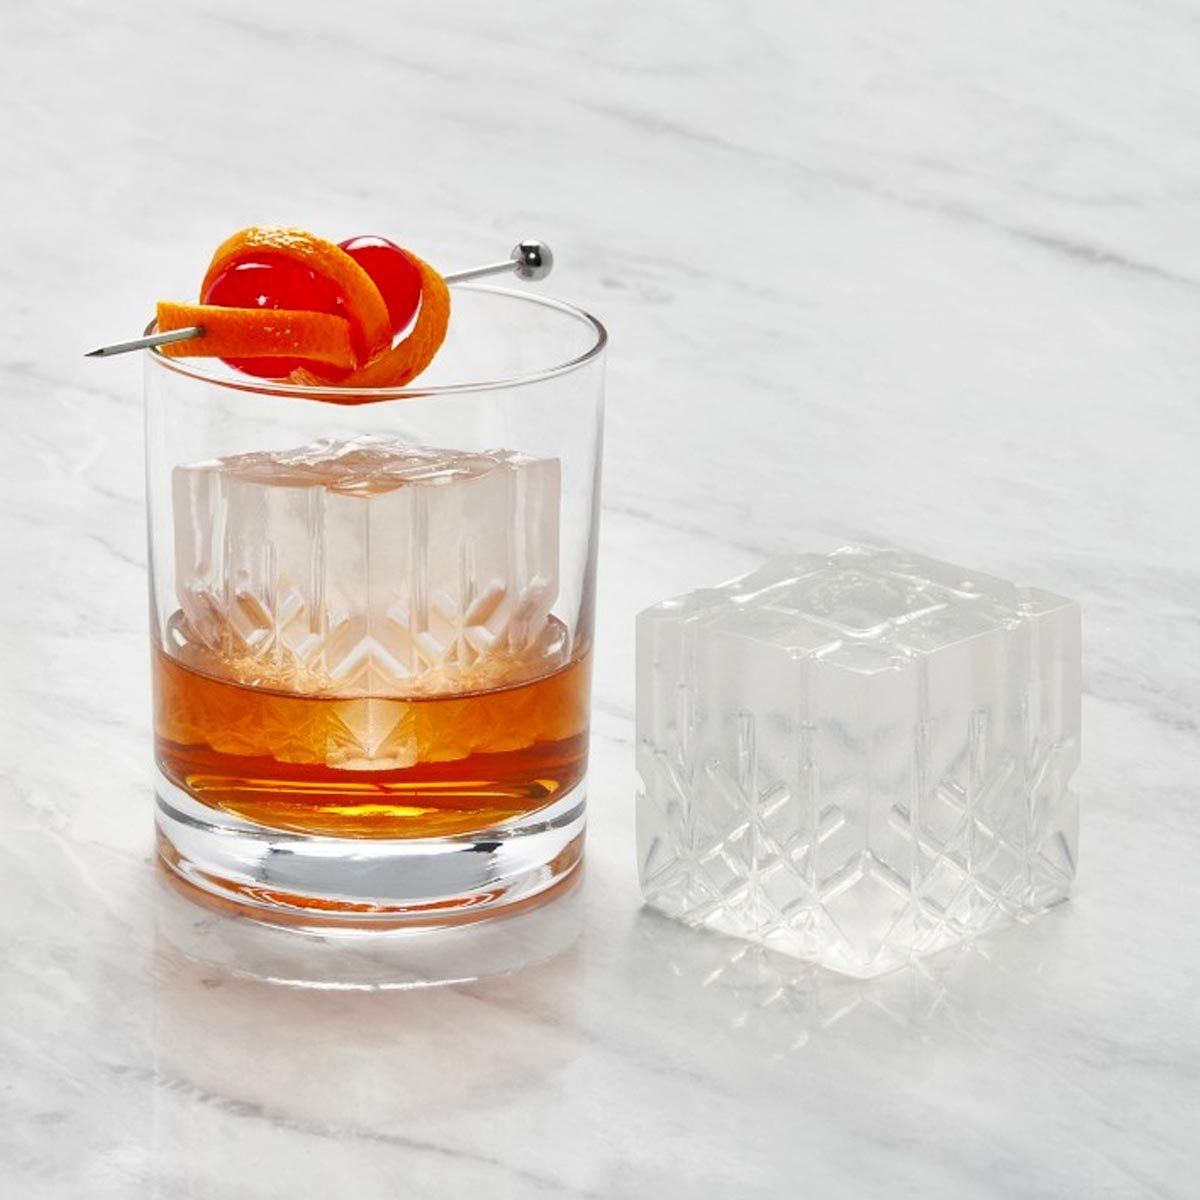 9 Cool Ice Cube Trays [Updated]